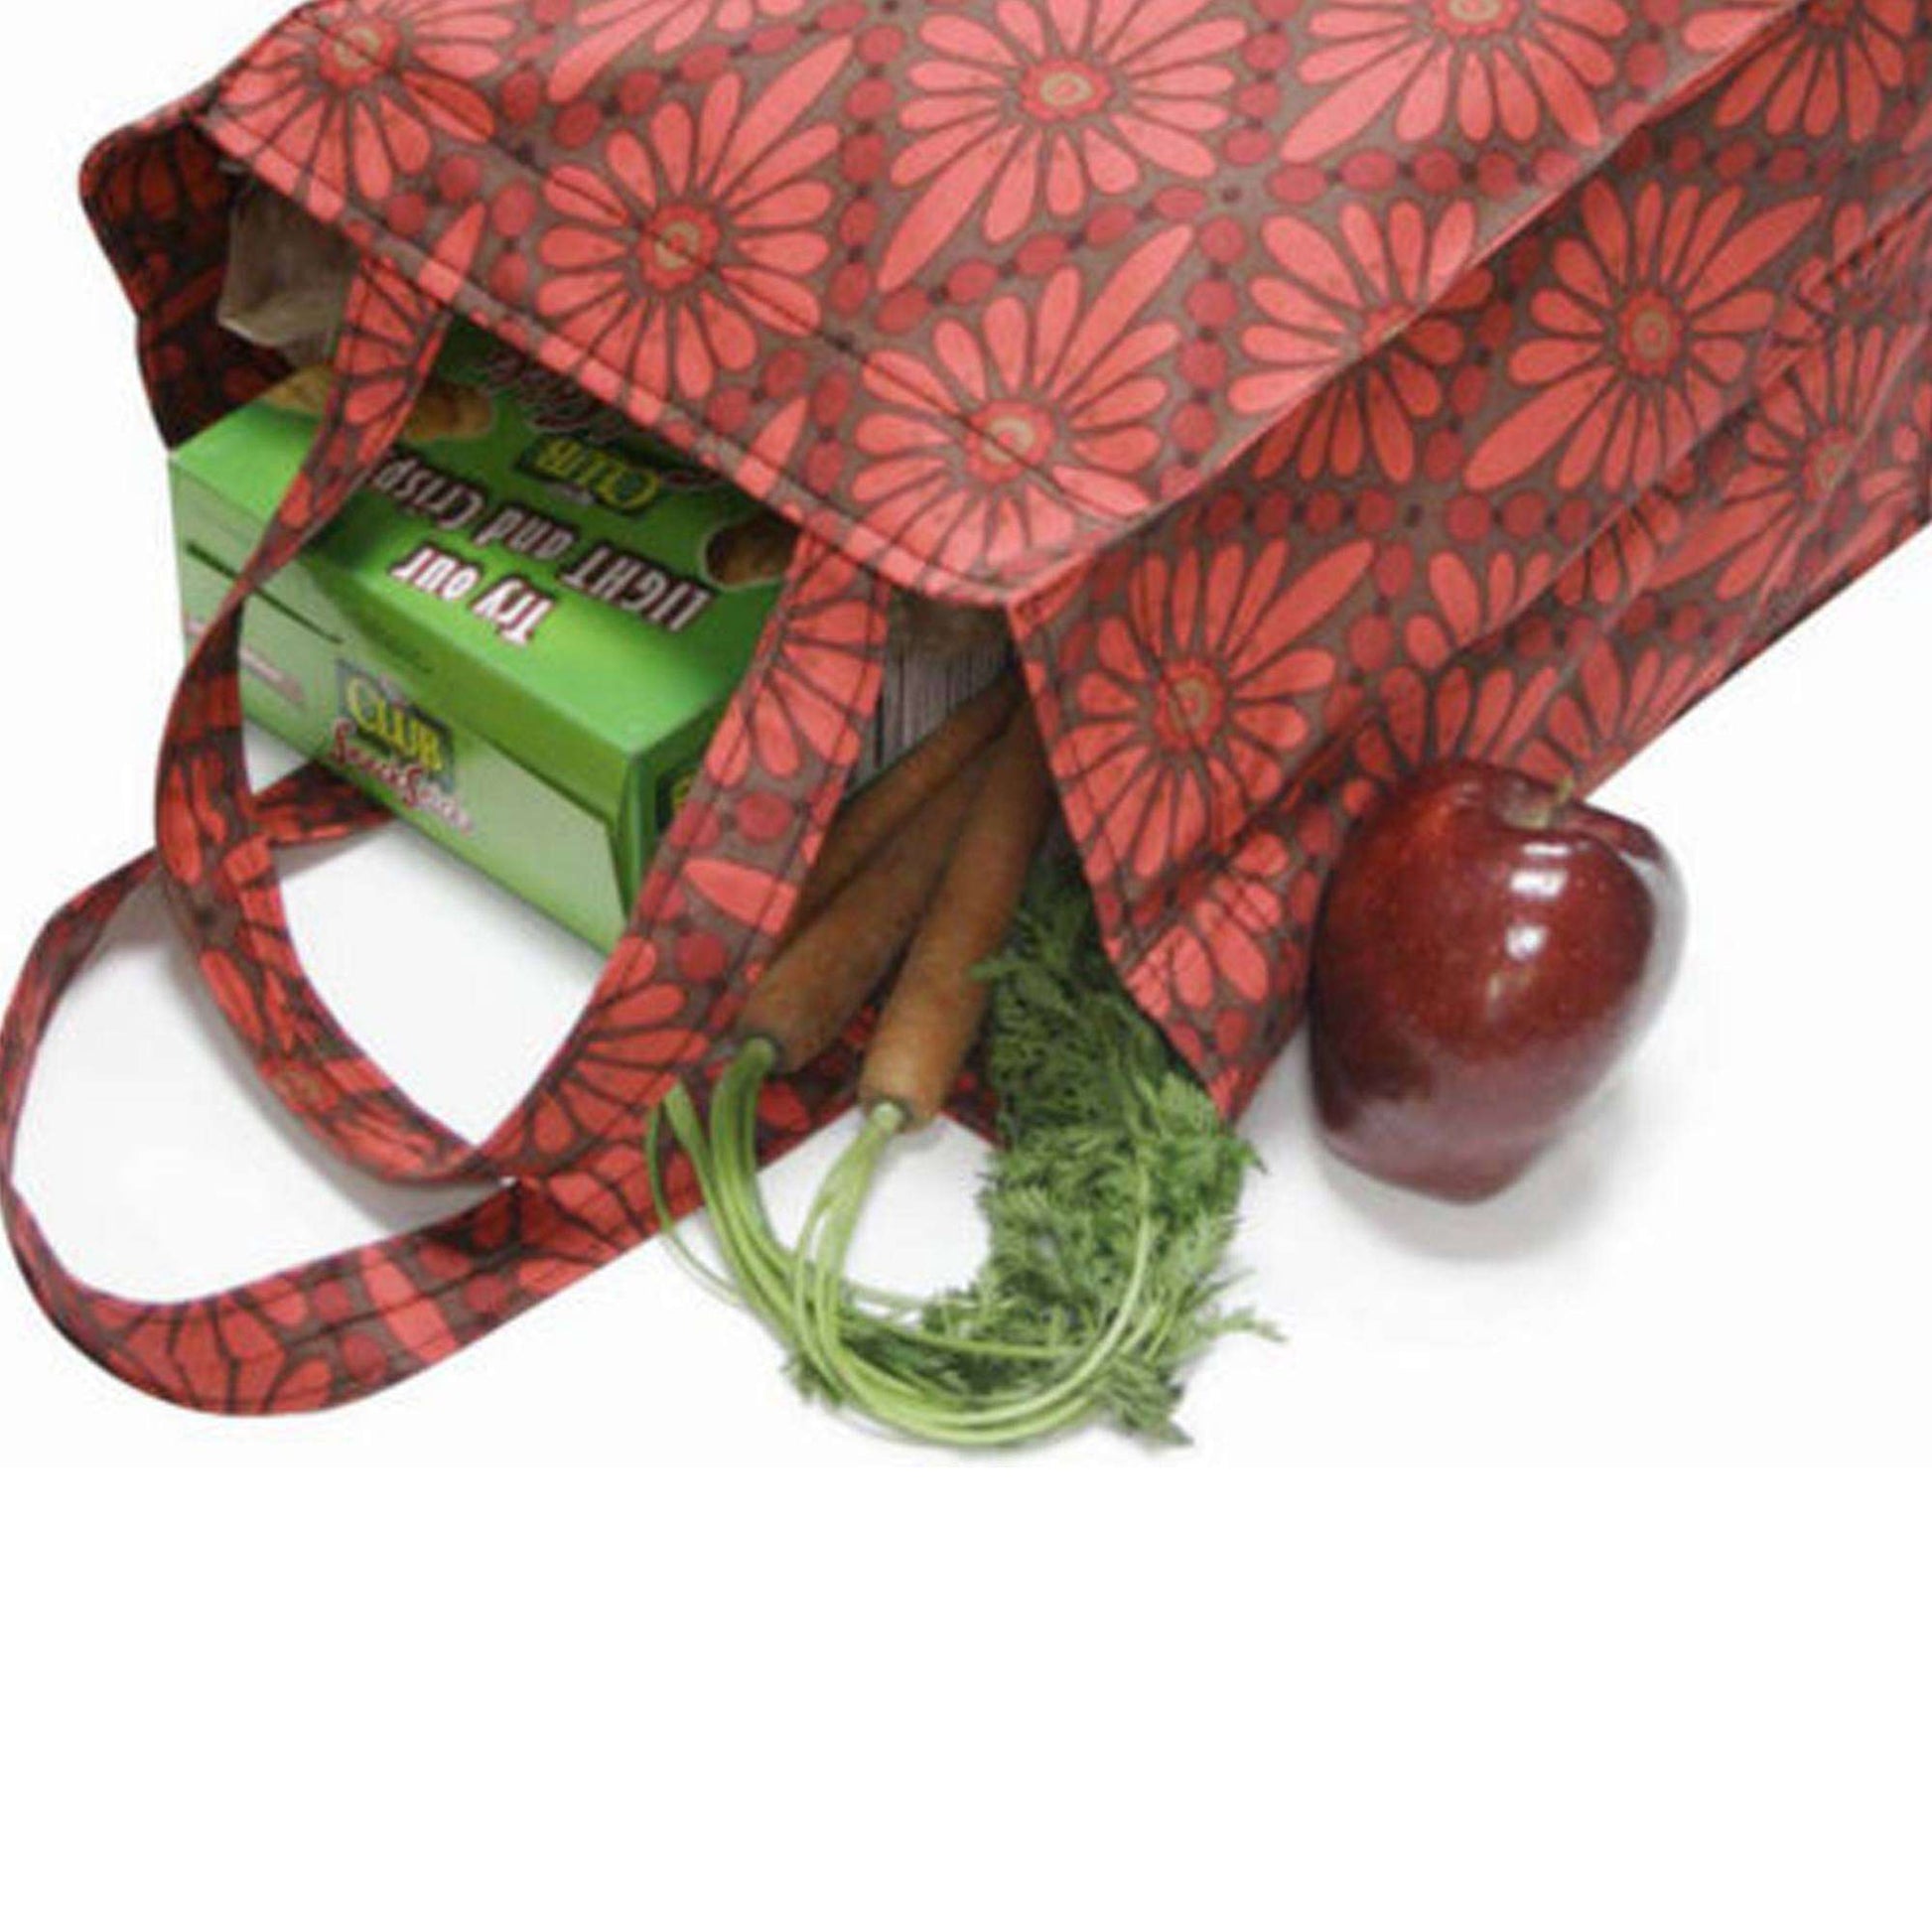 Free Coats & Clark Reusable Grocery Bag Sewing Pattern